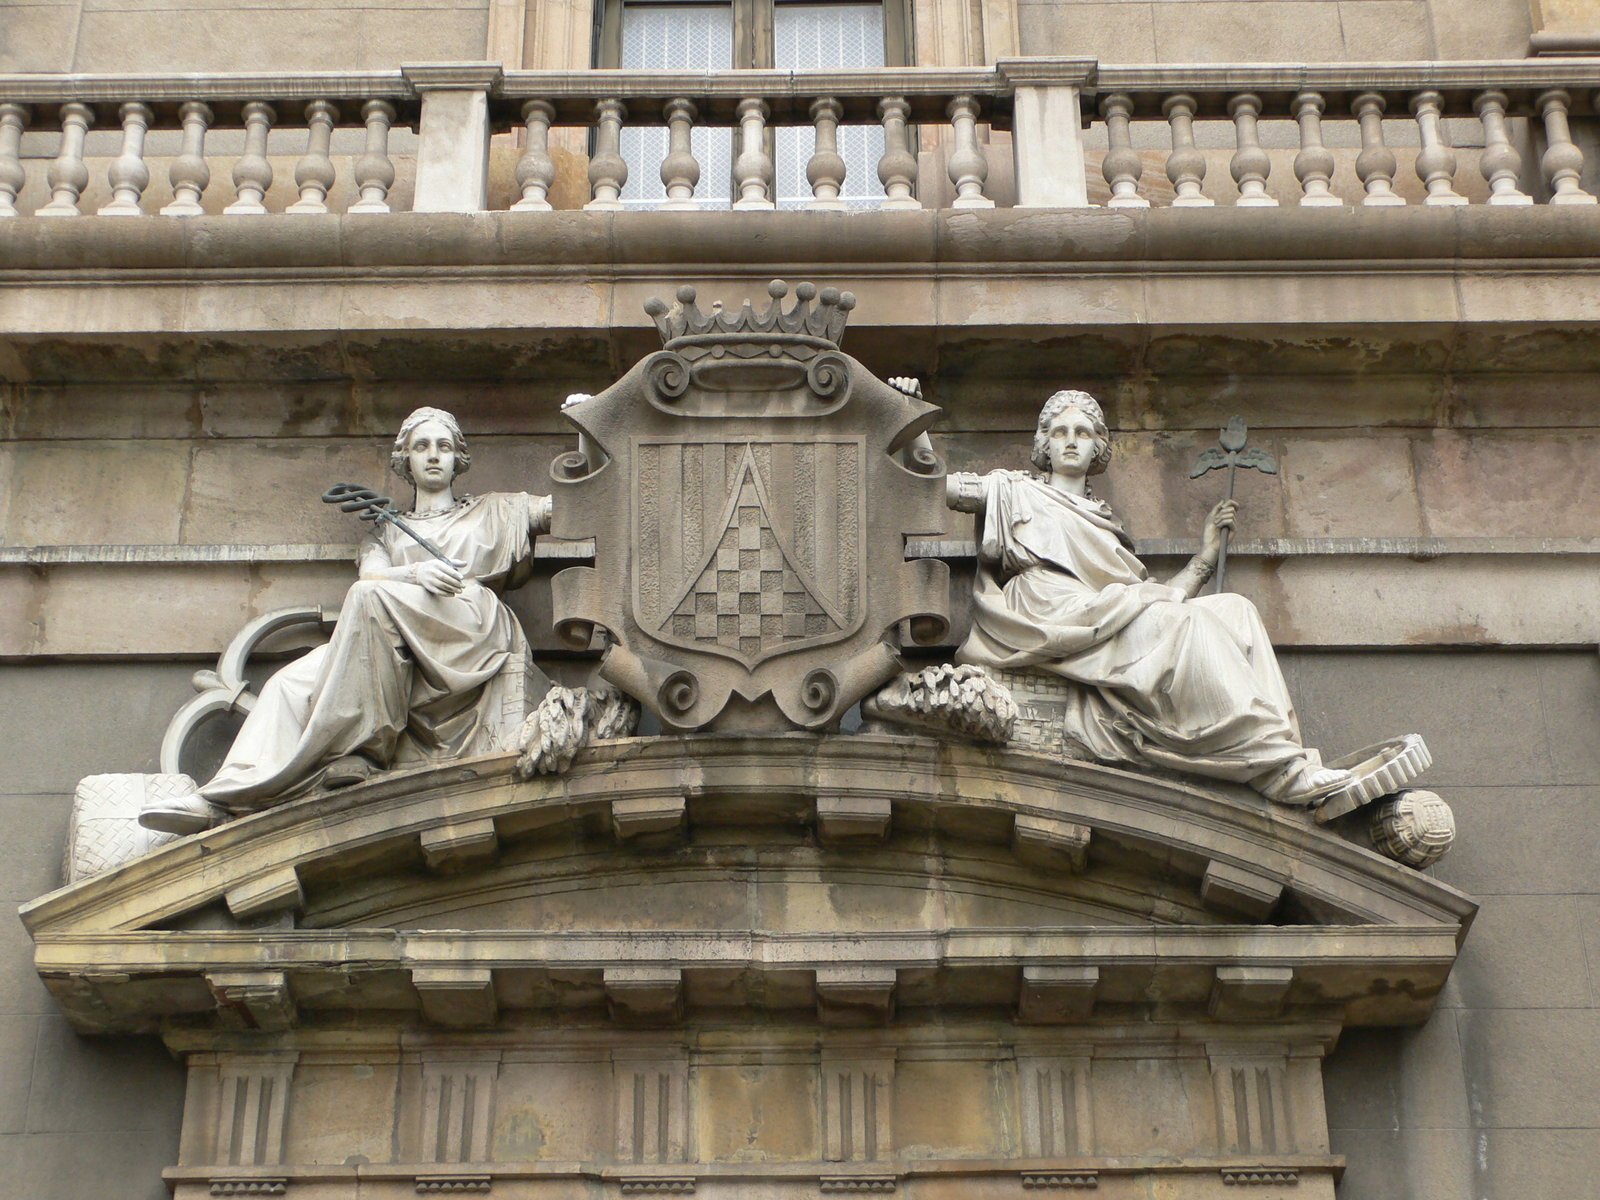 architectural details including two statues on top of each other